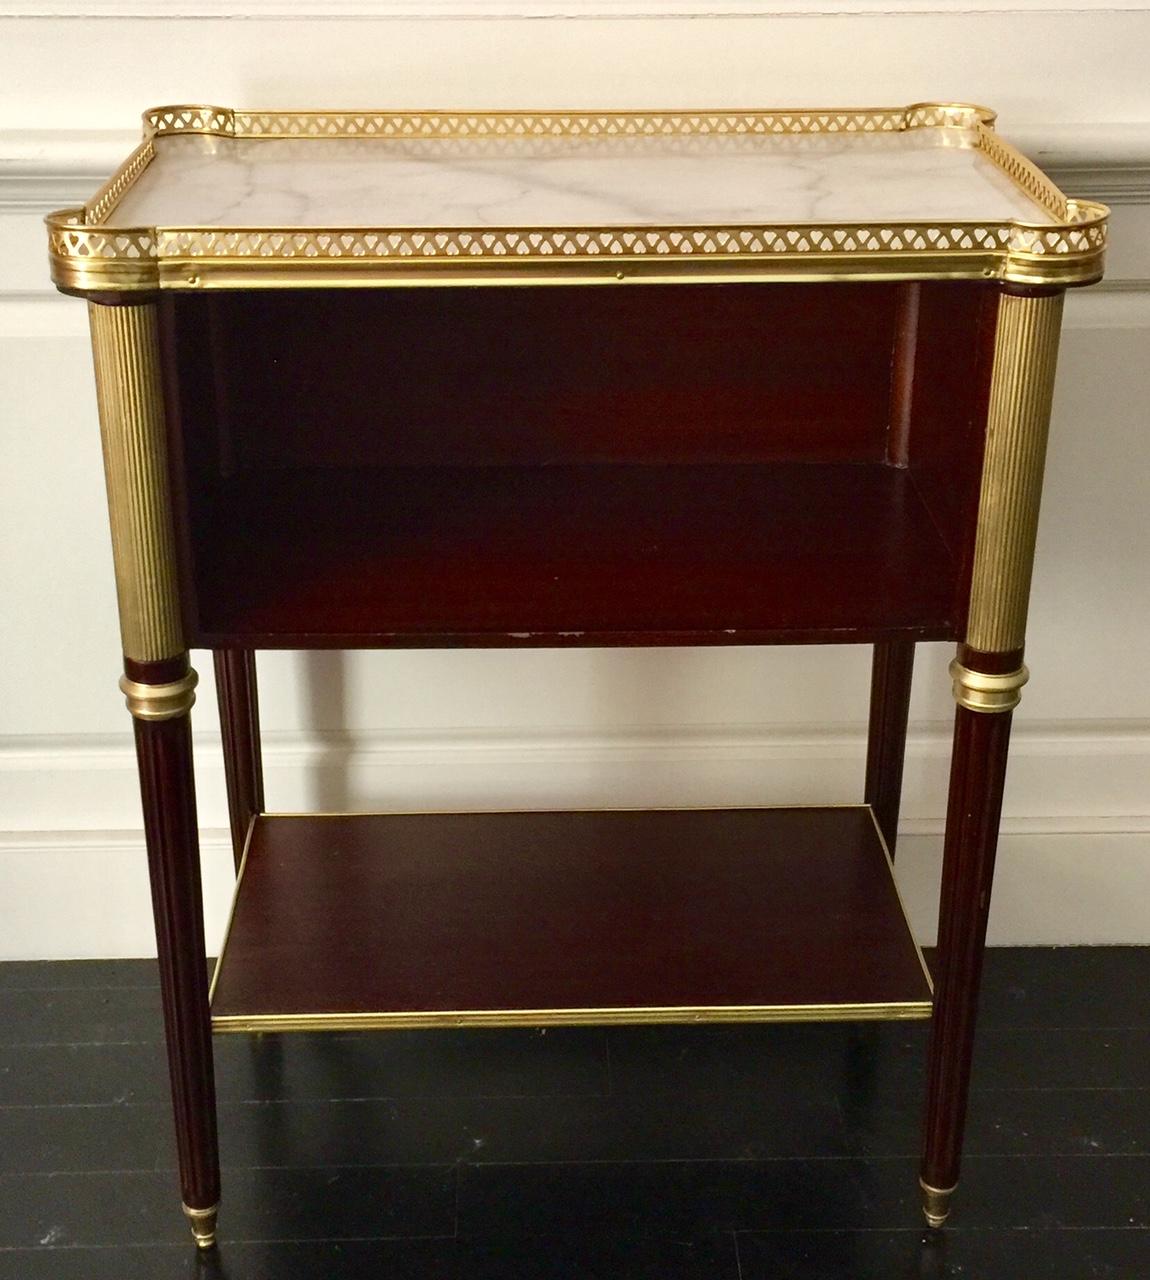 French Louis XVI style table in the manner of Maison Jansen
This lovely contemporary occasional table or nightstand was inspired by a Maison Jansen Telephone Table. Gallery top with pierced frieze. Open front cabinet. Great style at a lower price,